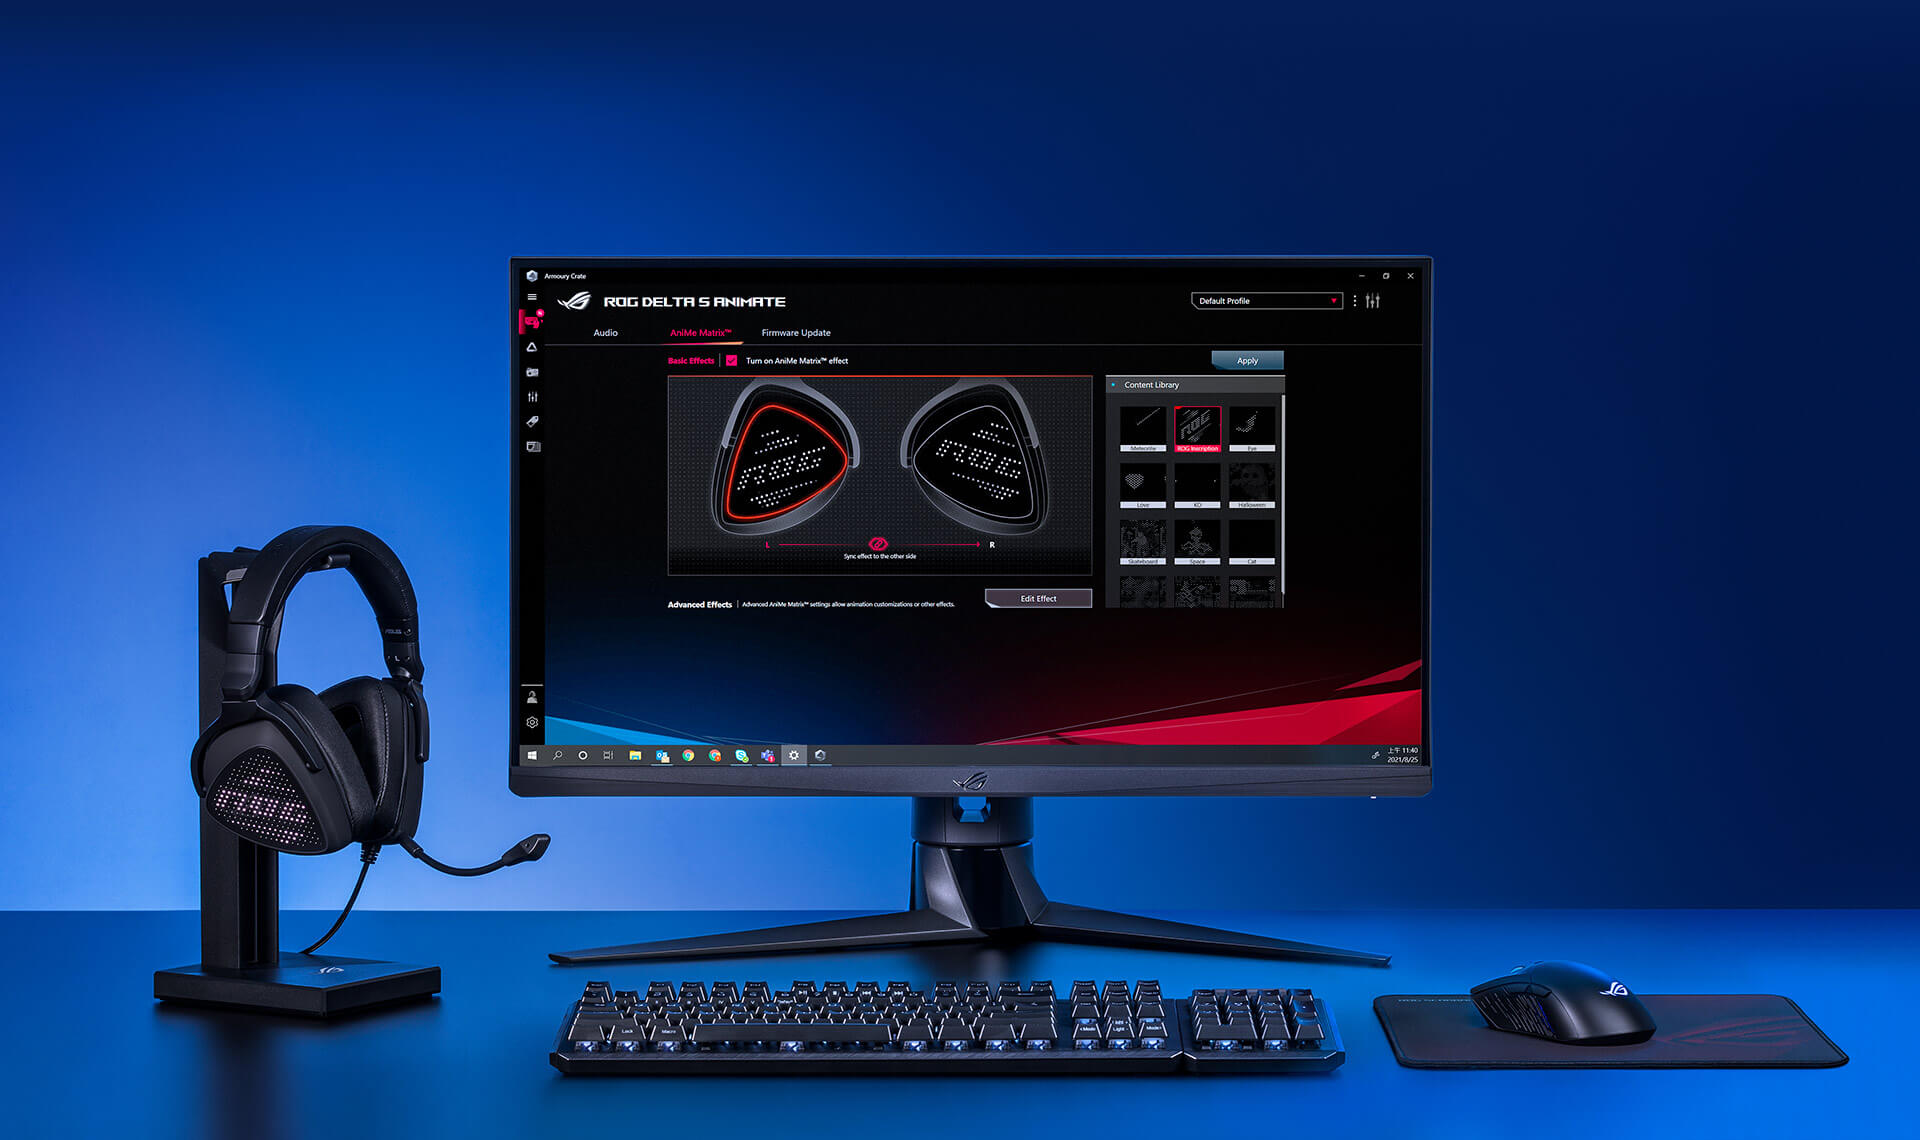 The Armoury Crate UI being displayed on an ROG monitor